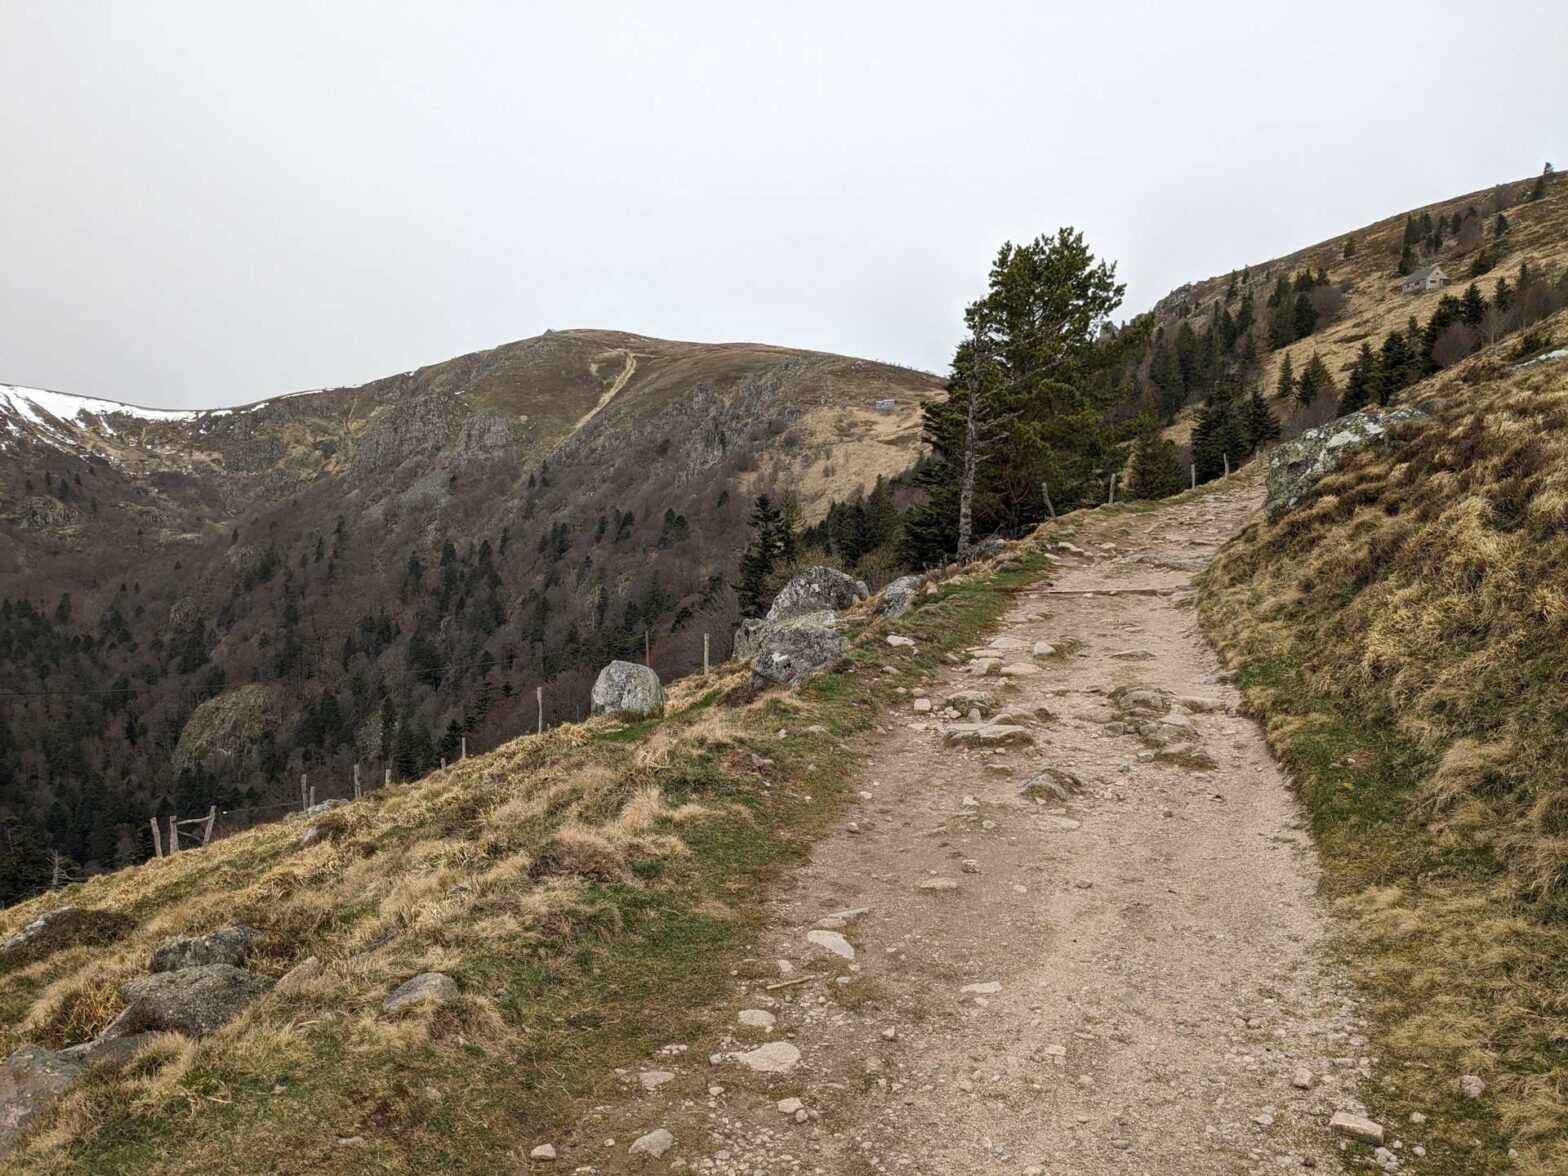 Walking up Hohneck Peak in the Vosges, Alsace